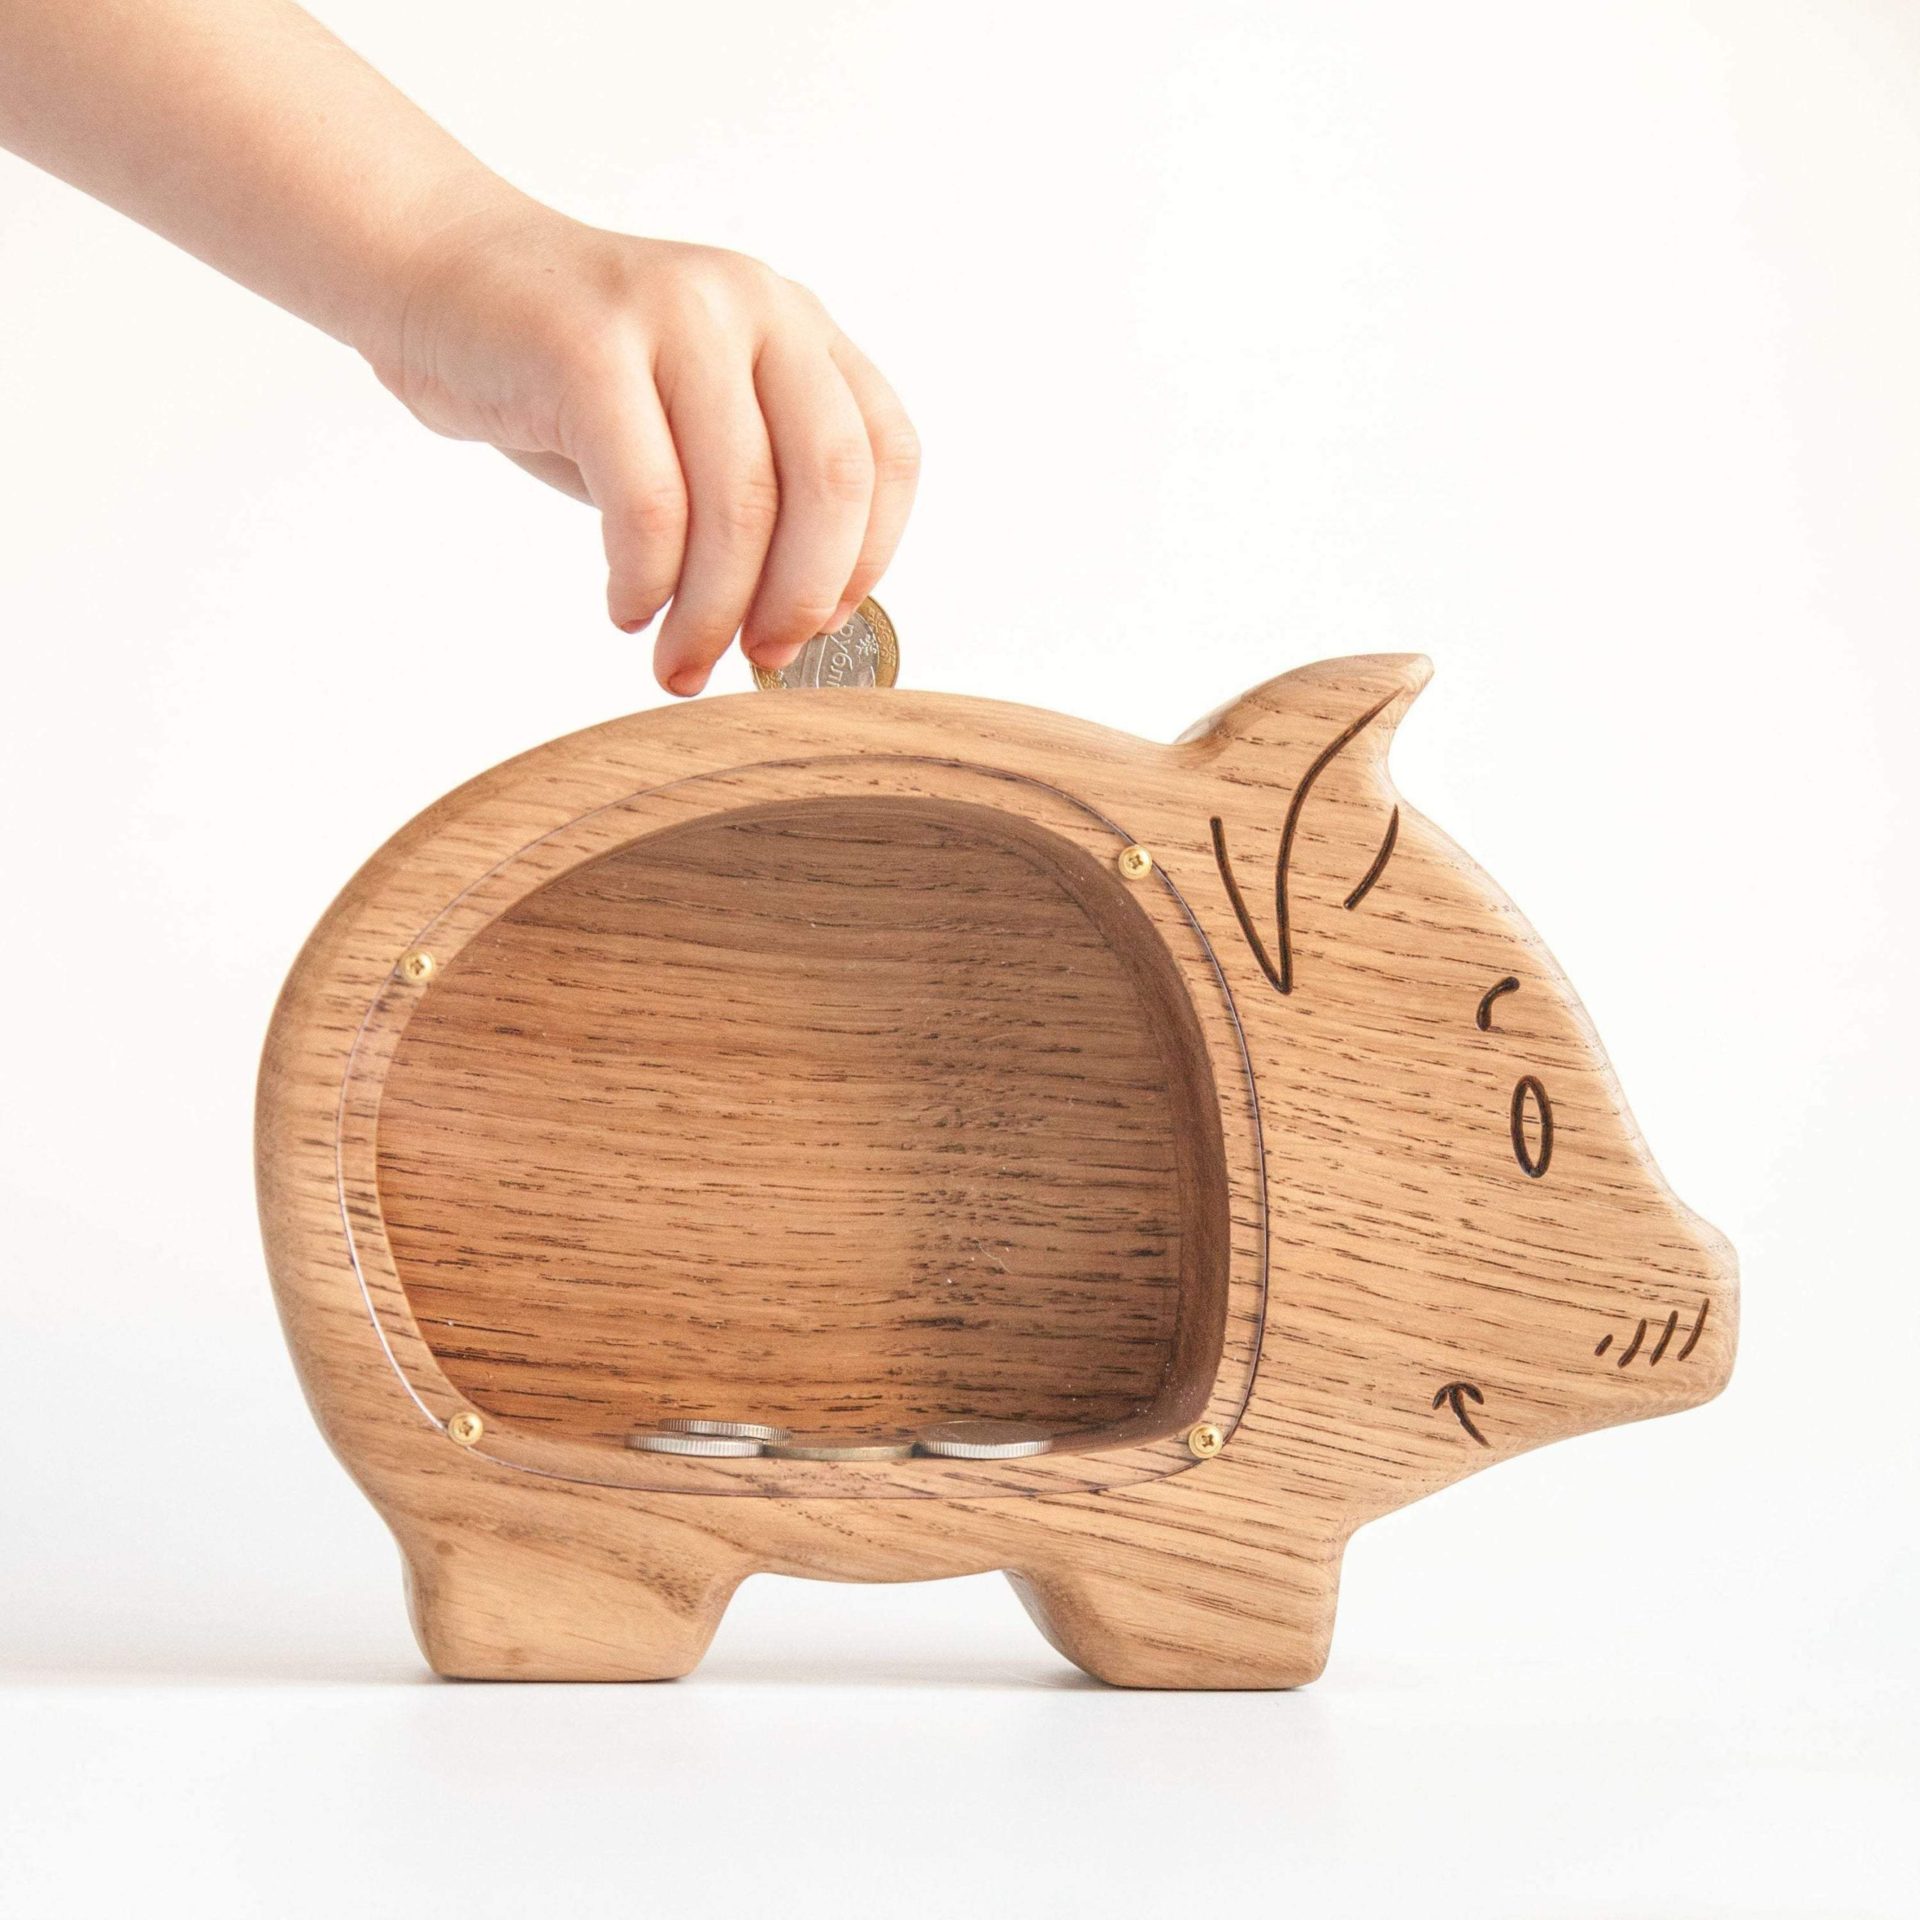 2 sizes available Baby piggy bank - Wooden money box Wooden coin box Any letter money box Wooden money bank Alphabet money box Kids money bank 